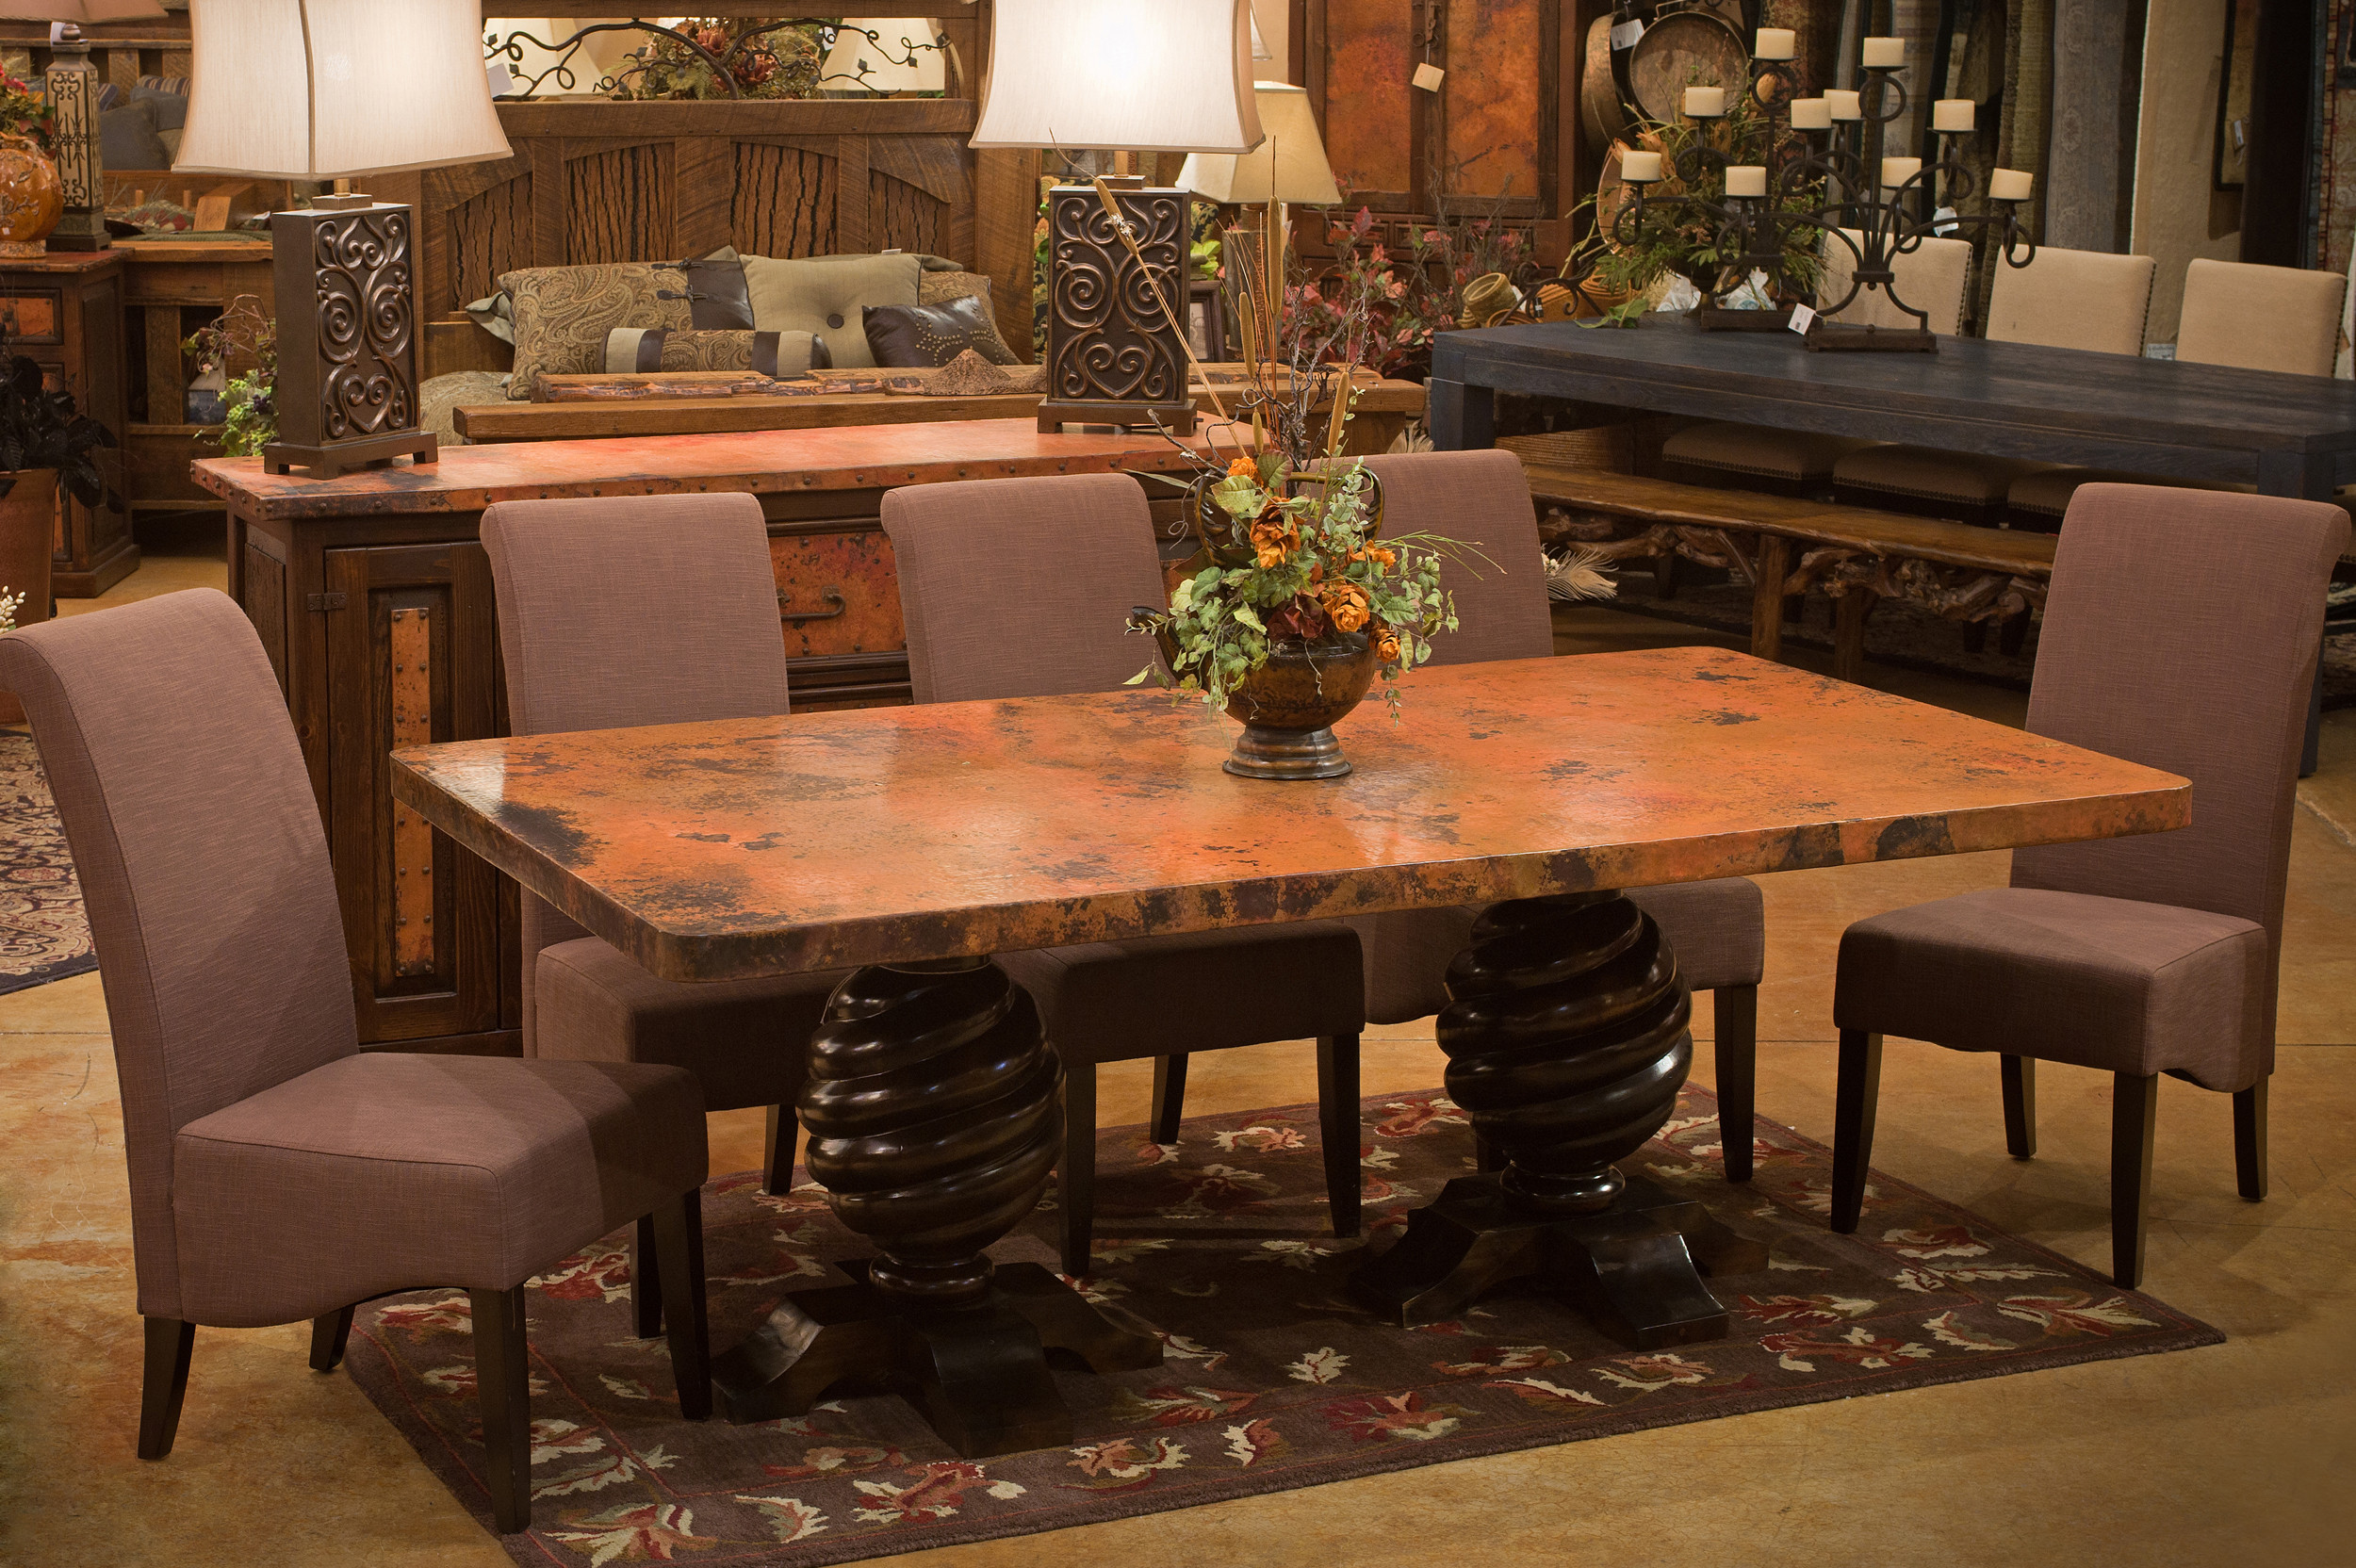 Old World Dining Tables Houzz, Old World Dining Room Table